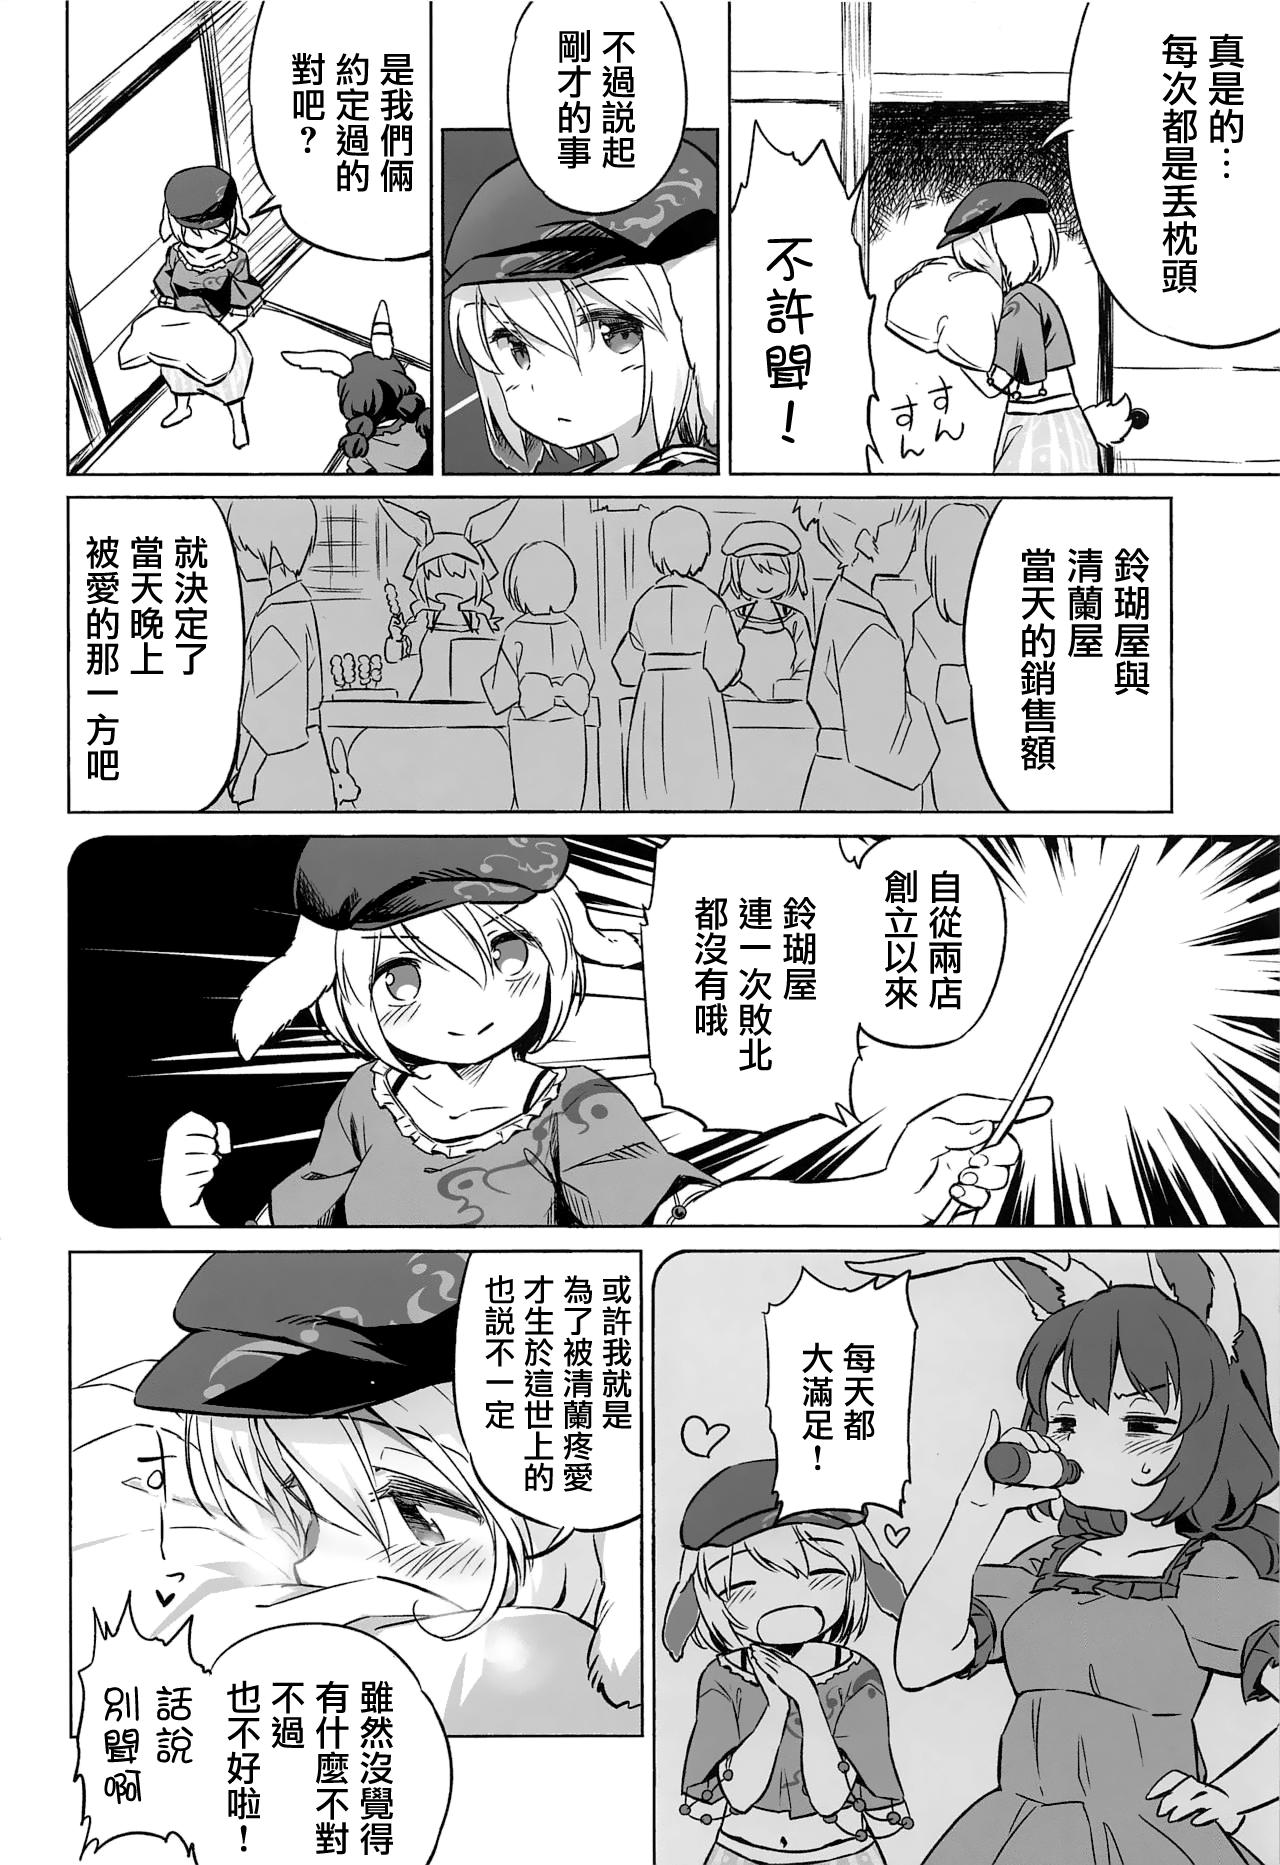 Chilena Granny Smith Mating - Touhou project Best Blowjob - Page 7